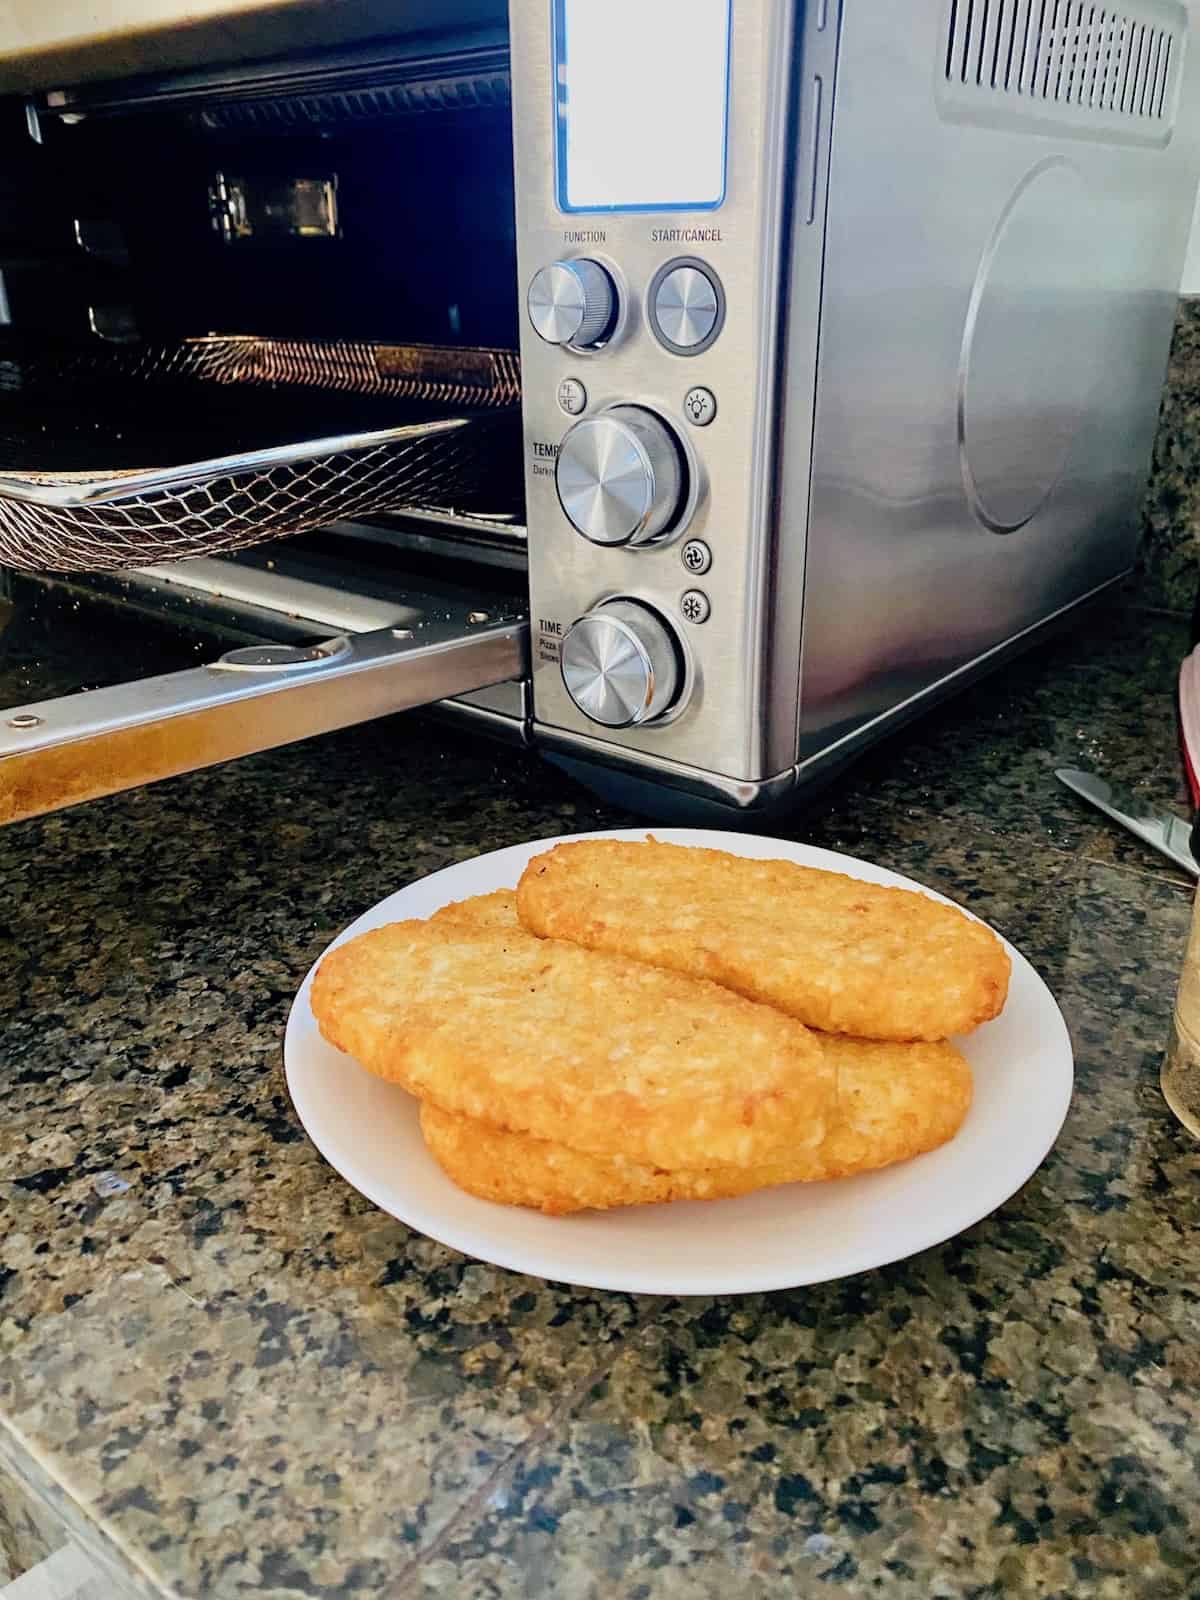  plated in front of the air fryer